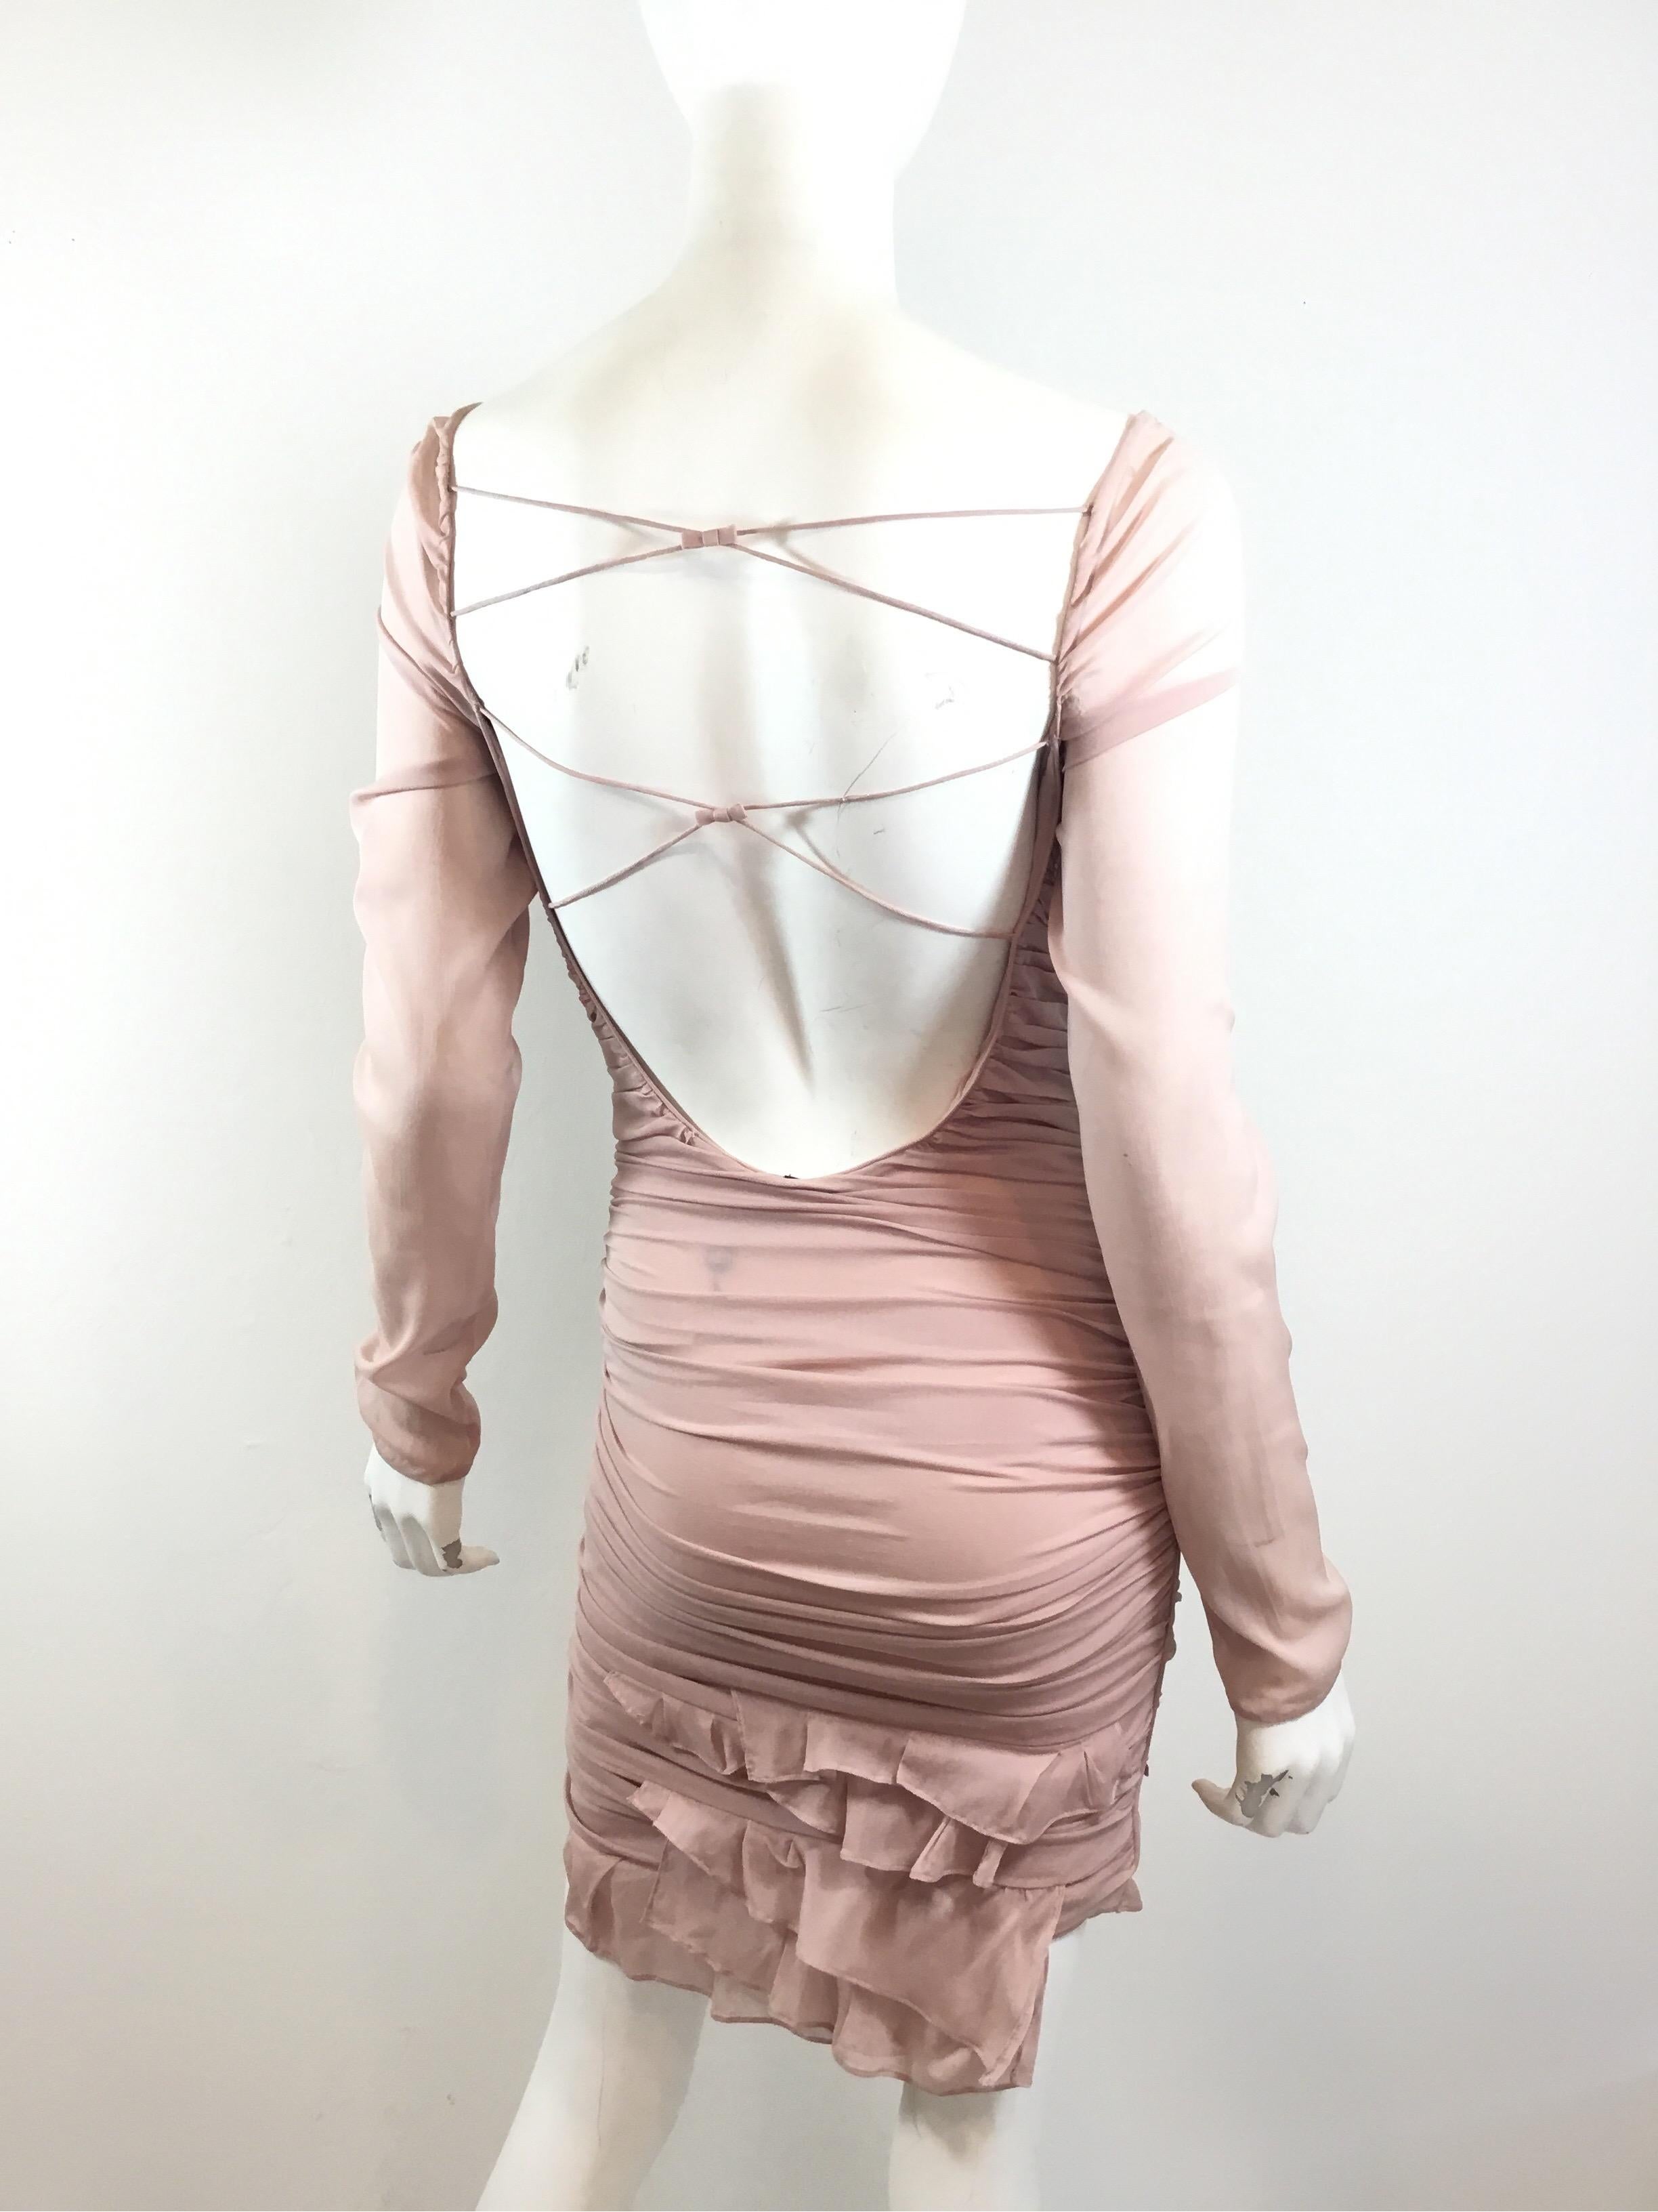 Women's Tom Ford for Gucci Ruched Dress, 2003 Spring Runway